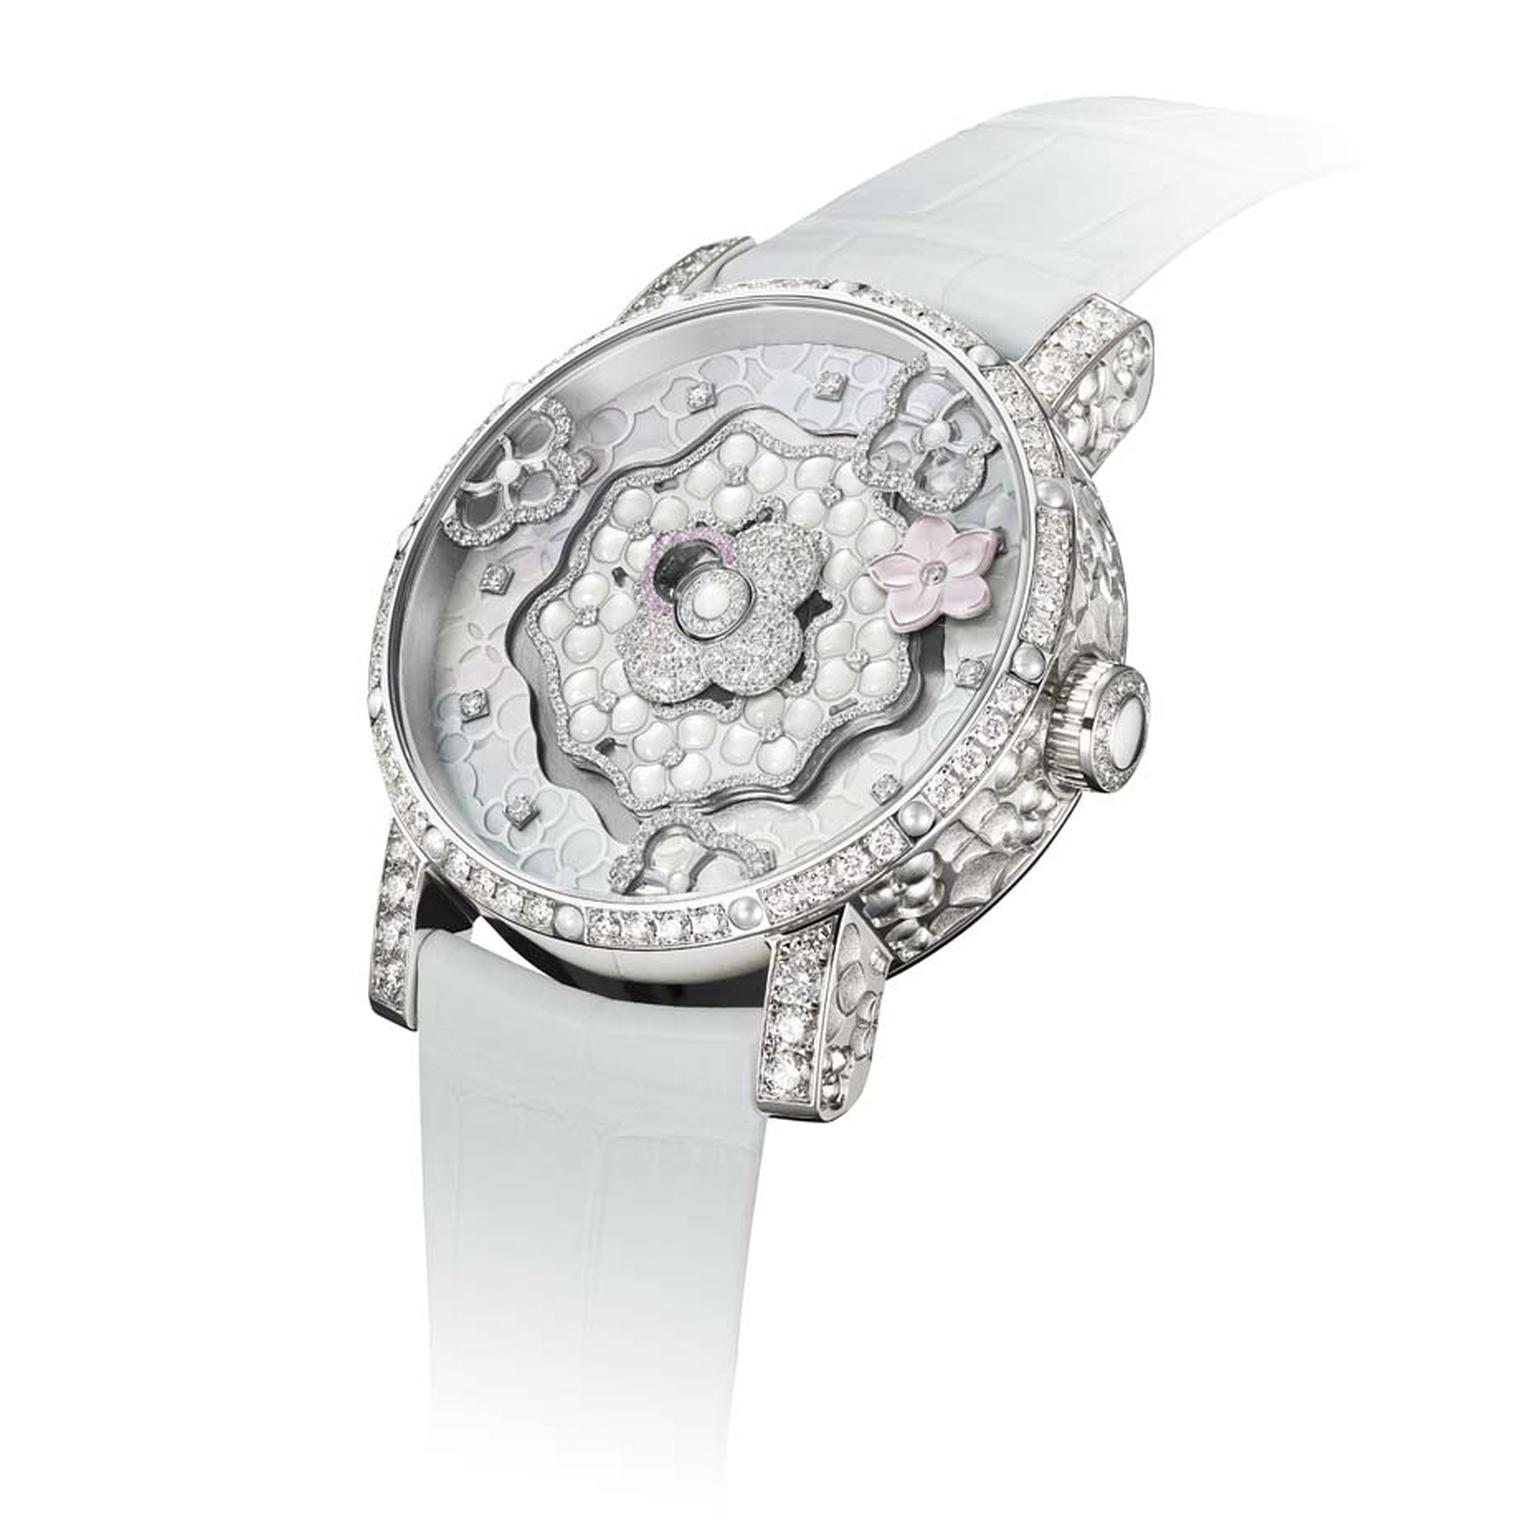 Chaumet has chosen the hydrangea flower as the star of its Hortensia Creative Complication ladies' watch, which displays the hours and minutes with mobile hydrangeas on the dial.